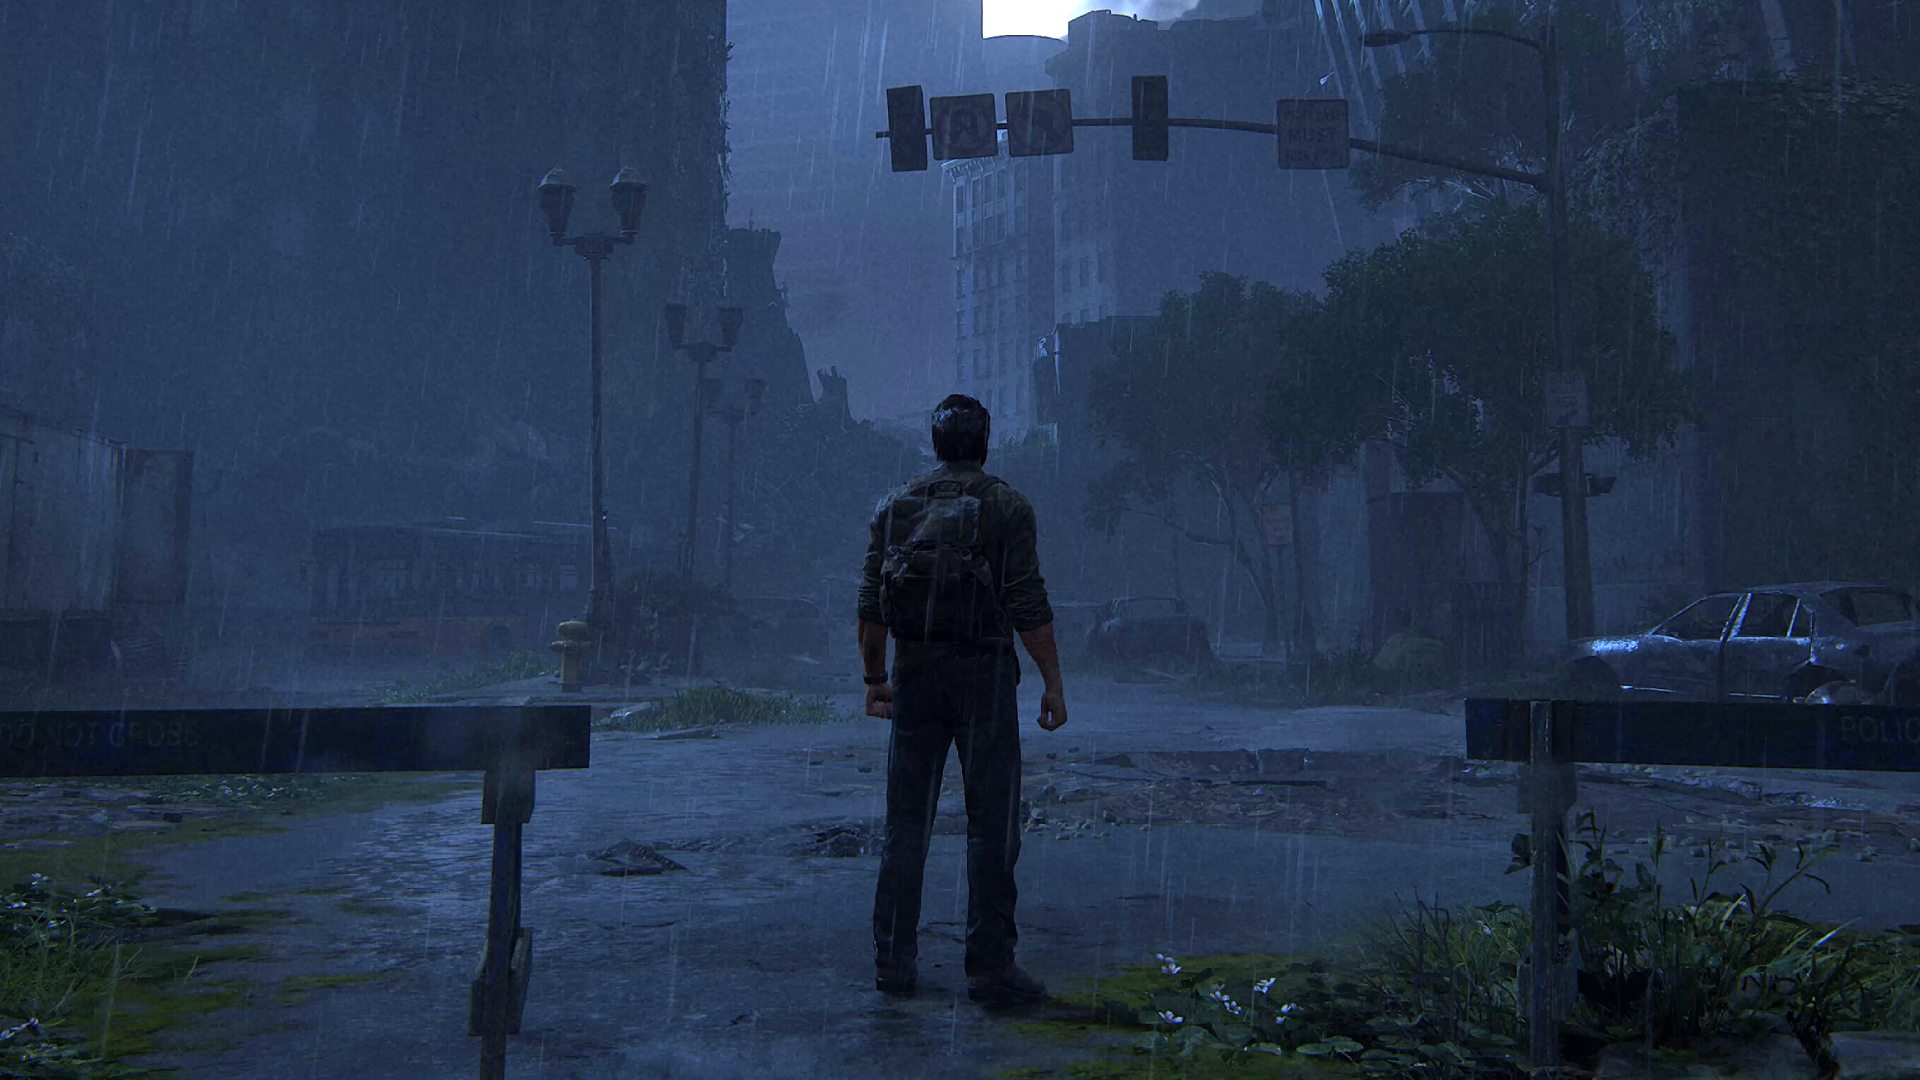 The best Last of Us settings: Joel standing in rainy cityscape